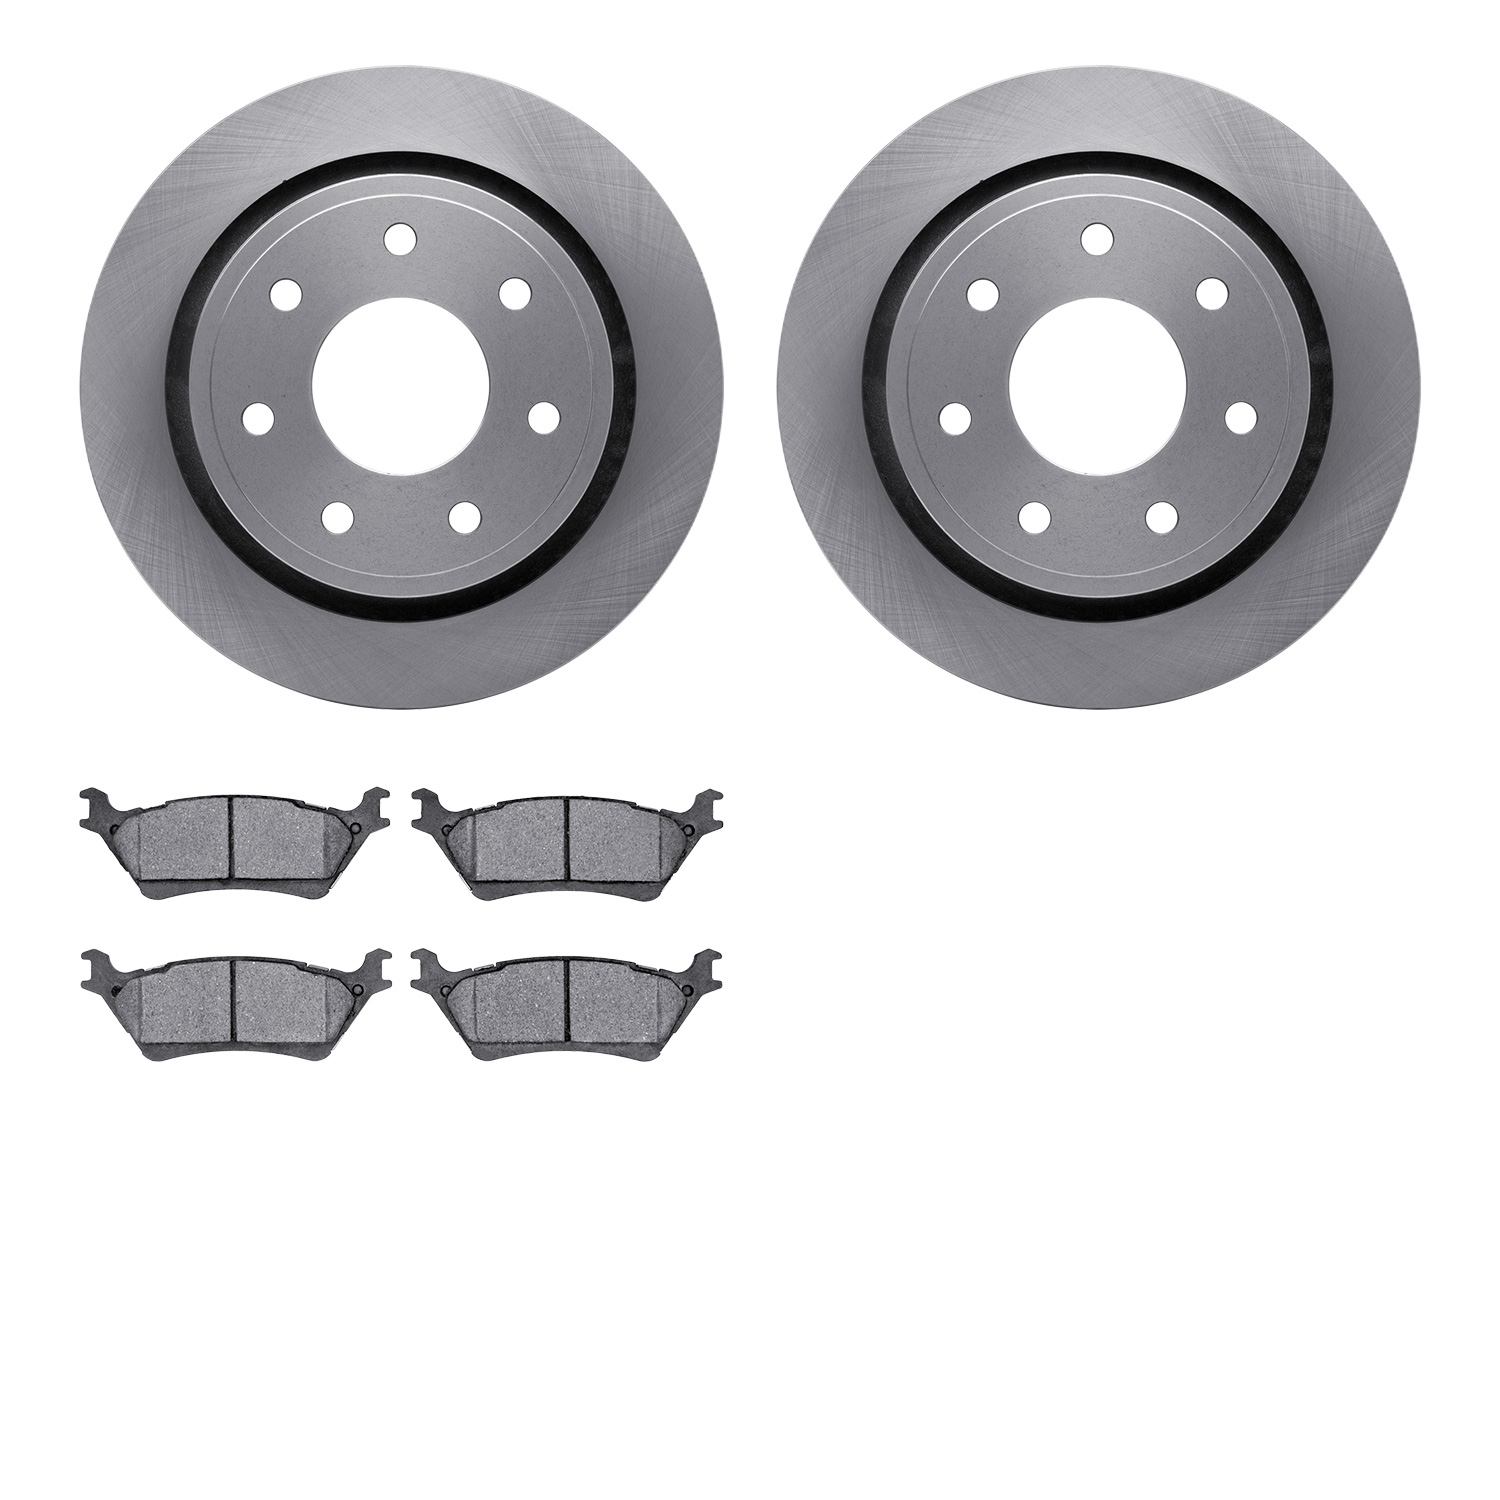 6402-54281 Brake Rotors with Ultimate-Duty Brake Pads, 2012-2014 Ford/Lincoln/Mercury/Mazda, Position: Rear